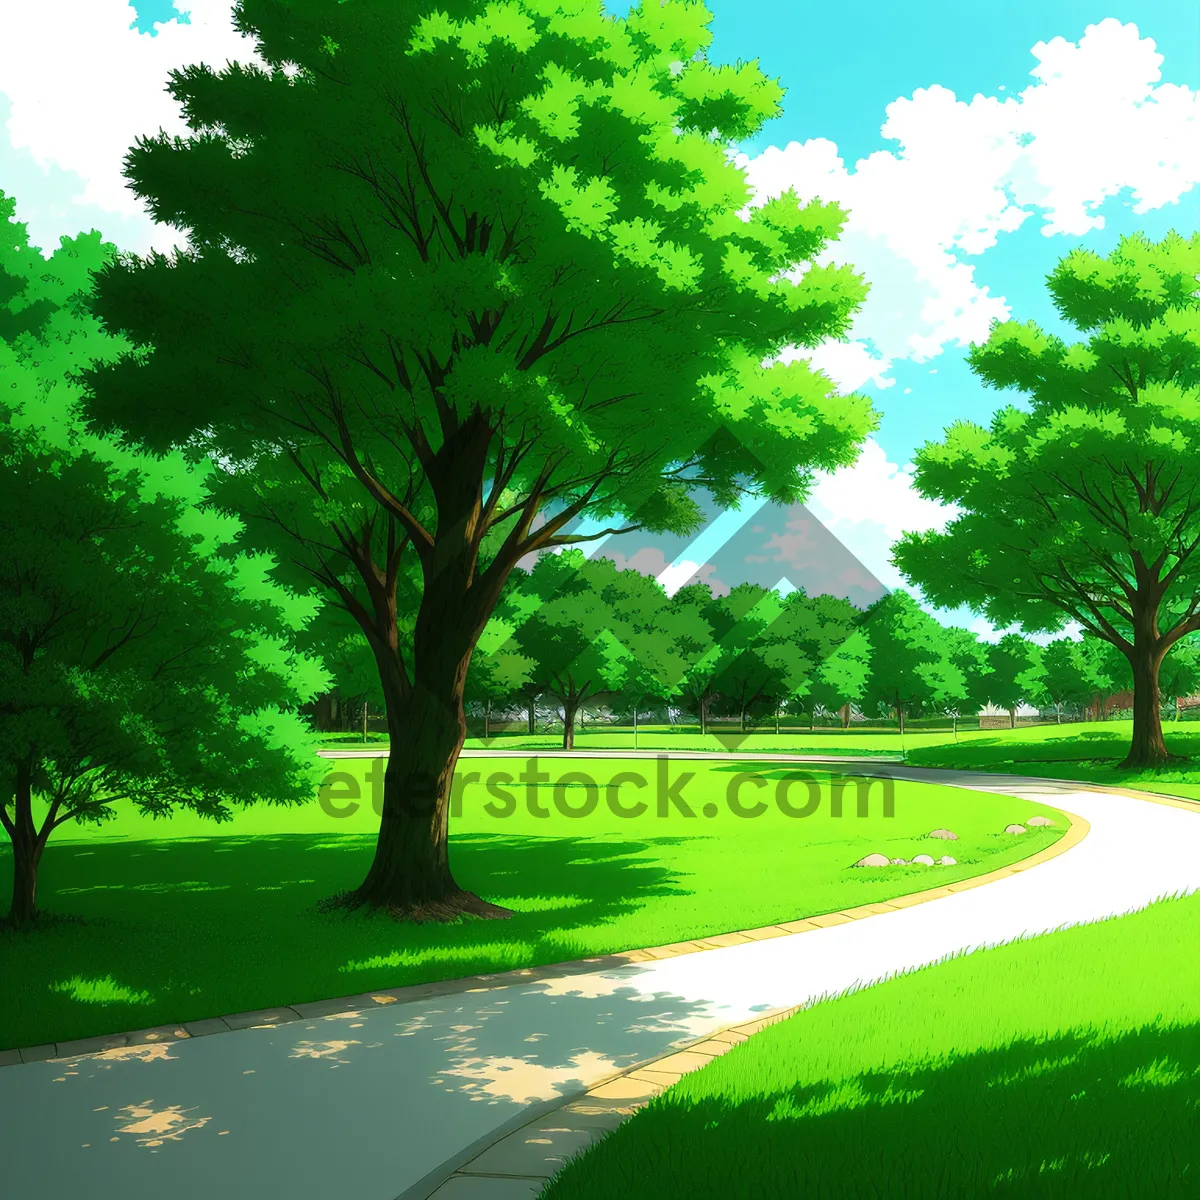 Picture of Serene Golf Course Amidst Lush Greenery and Clear Skies.